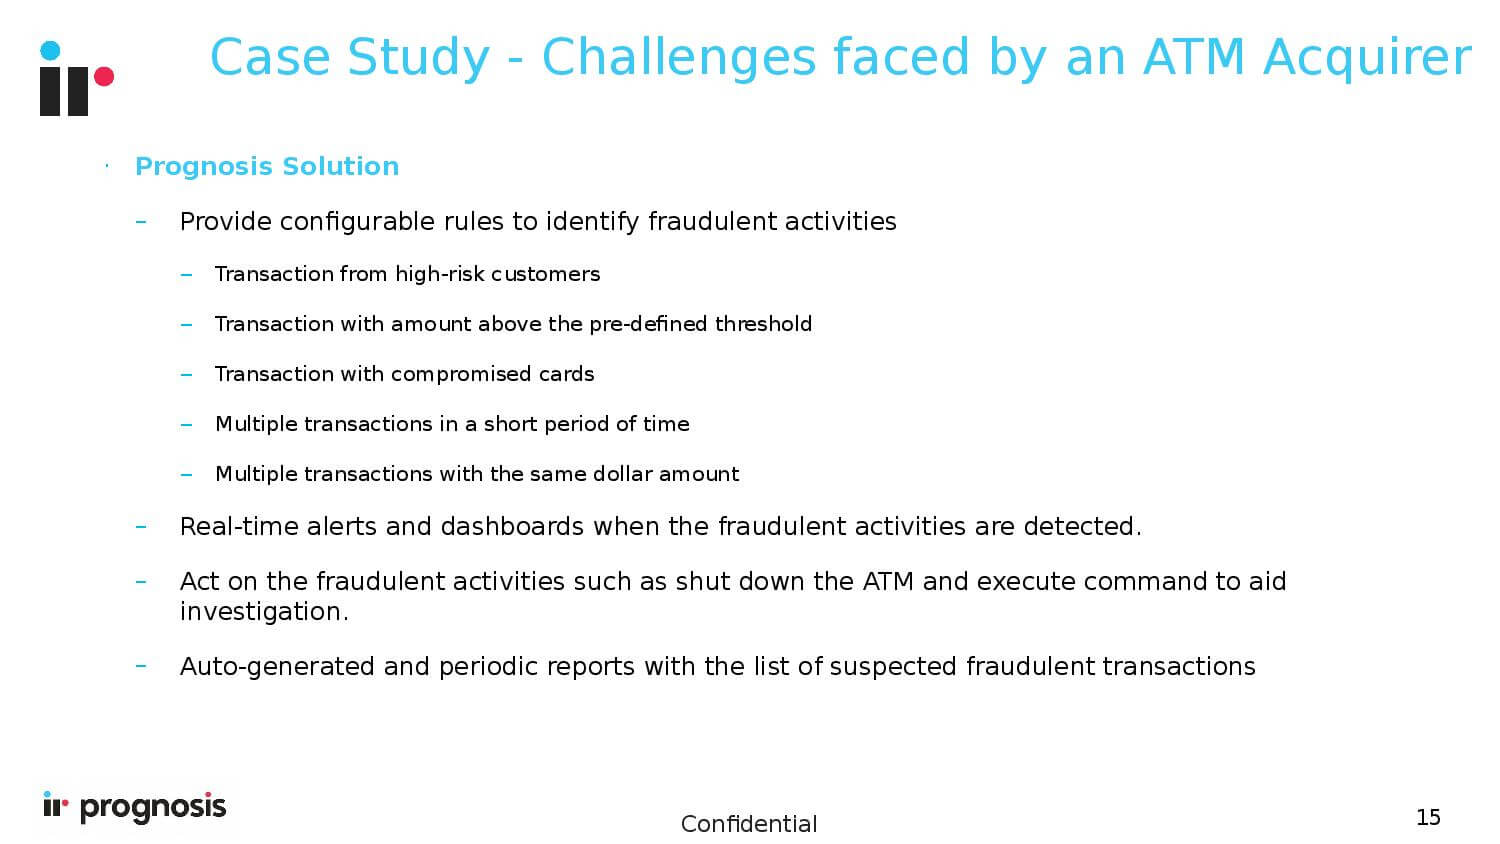 Case Study - Challenges faced by an ATM Acquirer